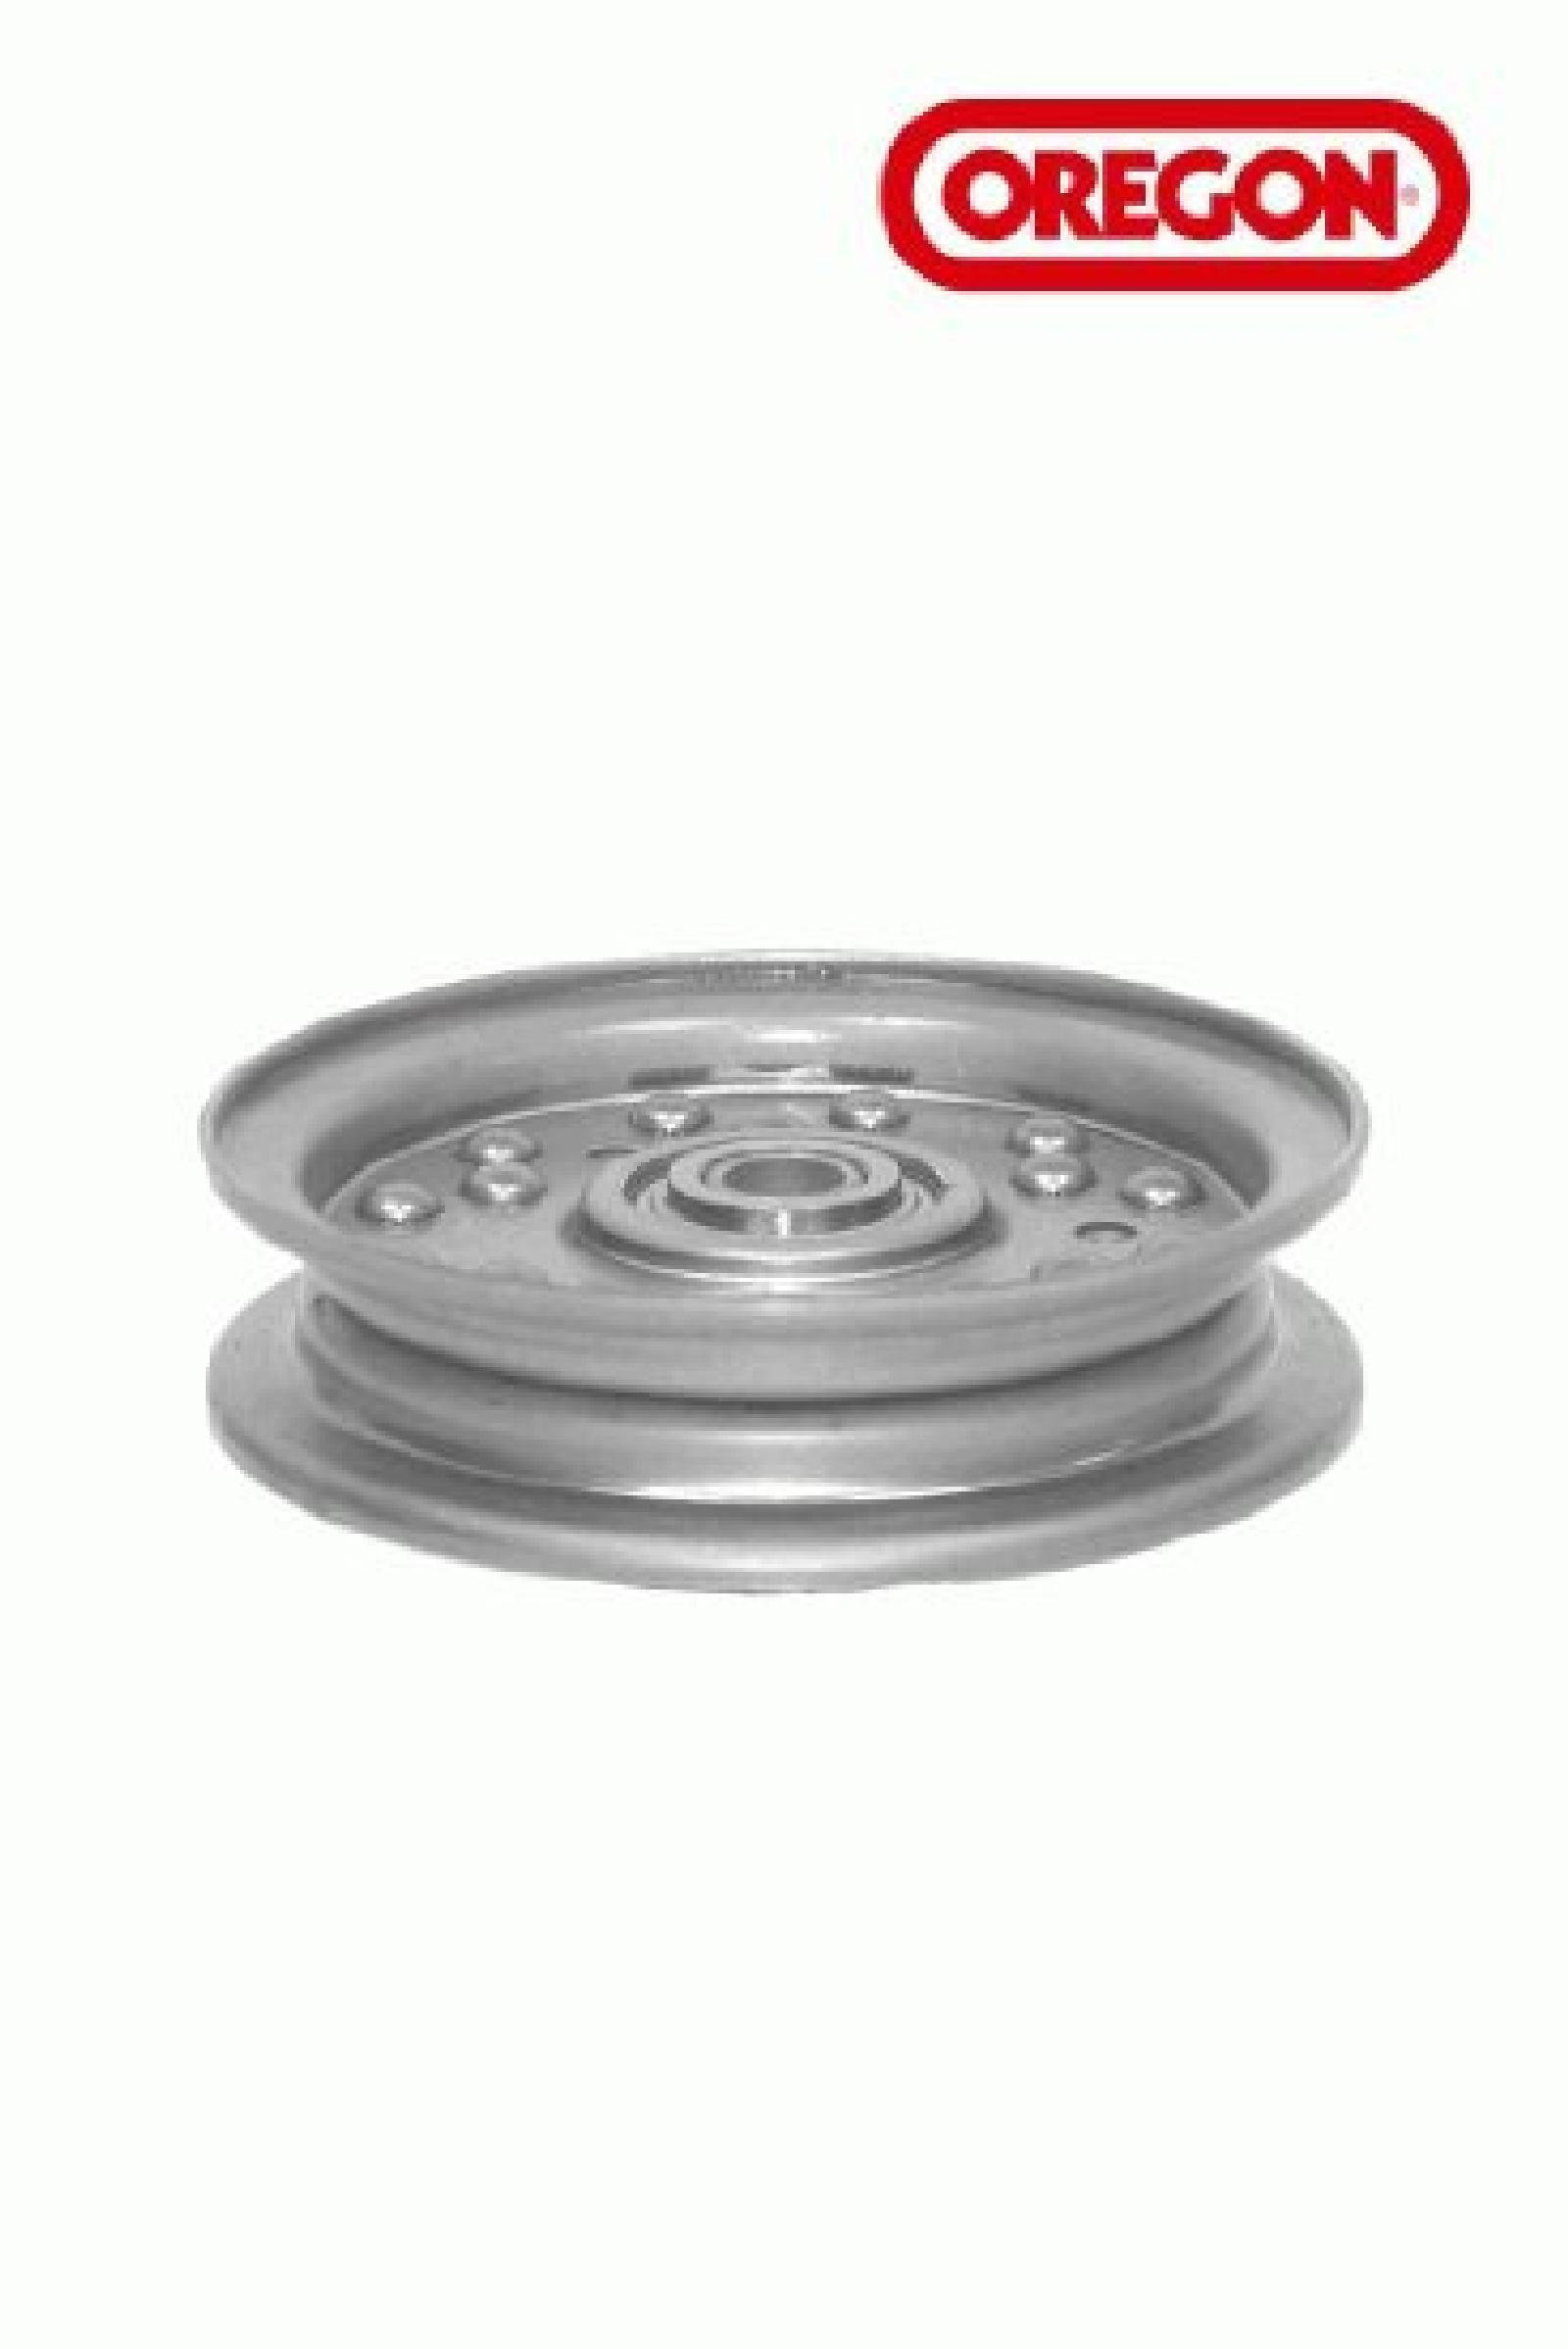 PULLEY, FLT IDLR DIXIE CH part# 78-009 by Oregon - Click Image to Close